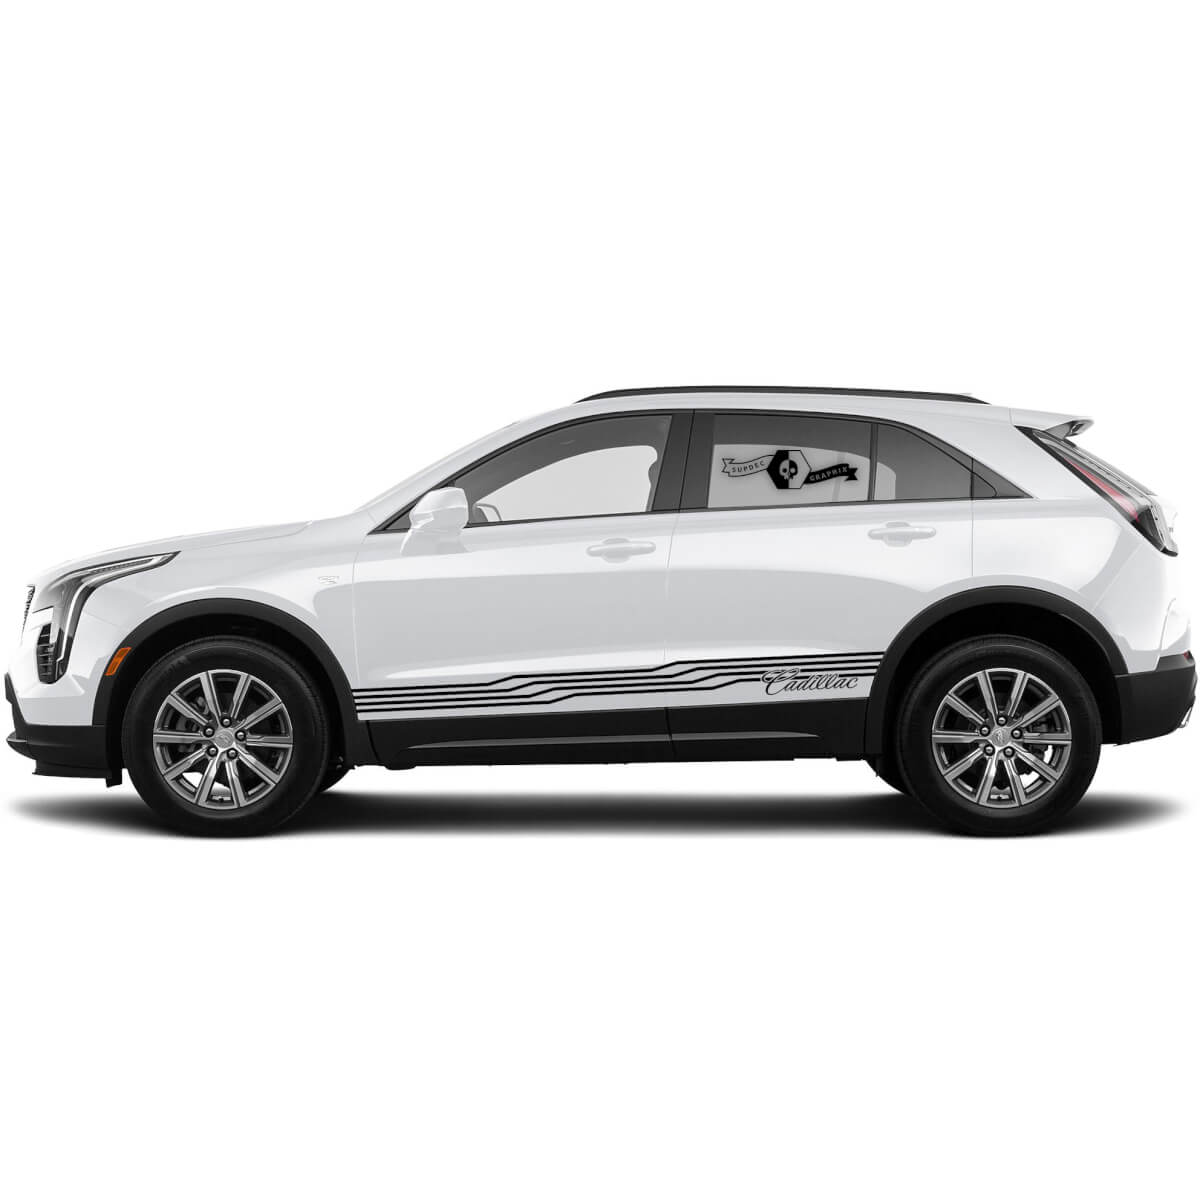 2 New Decal Rocker Panel Sticker Lines Curve Lines Illusion Stripe for Cadillac XT4